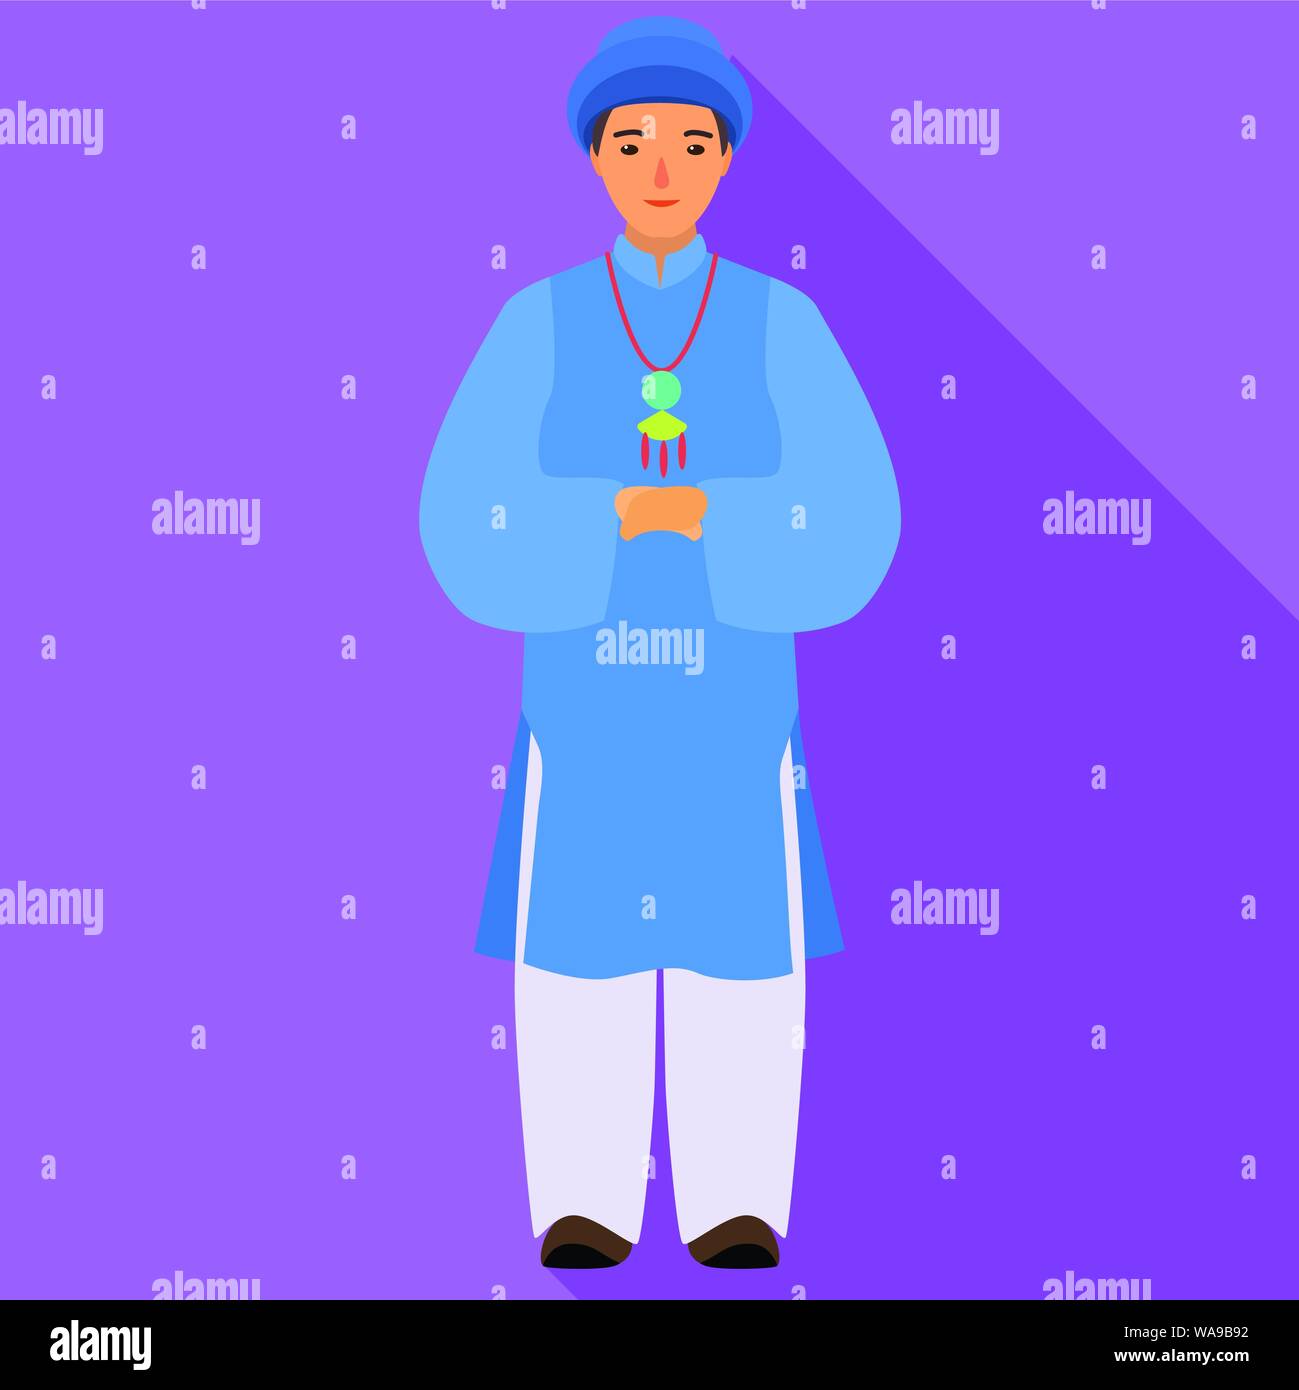 Vietnam traditional dress icon flat style Vector Image